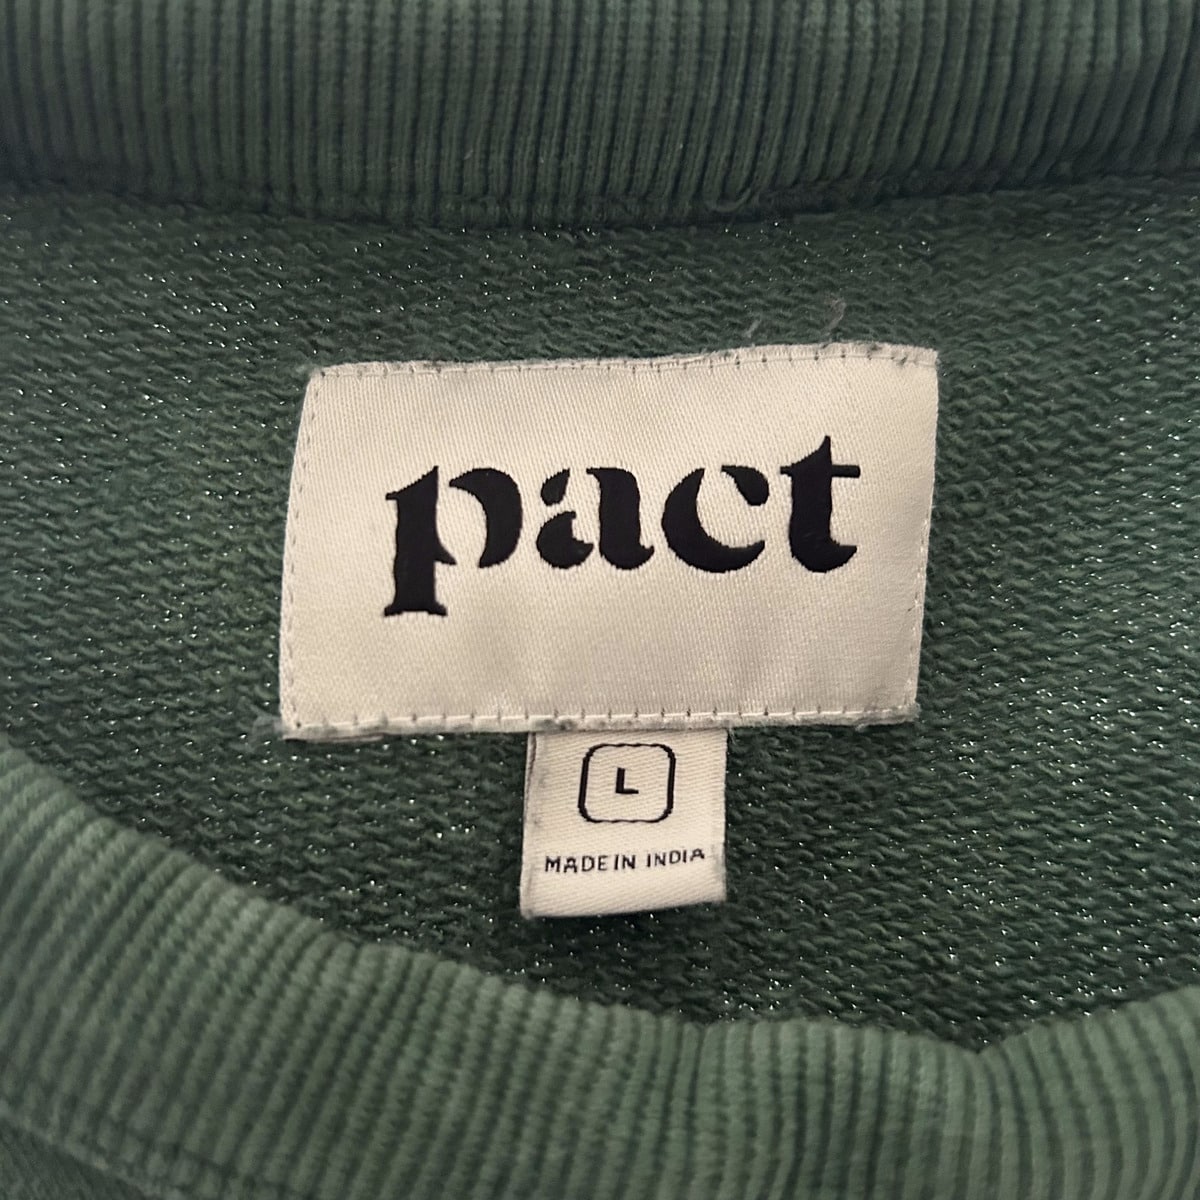 How Ethical and Sustainable is Pact Clothing?